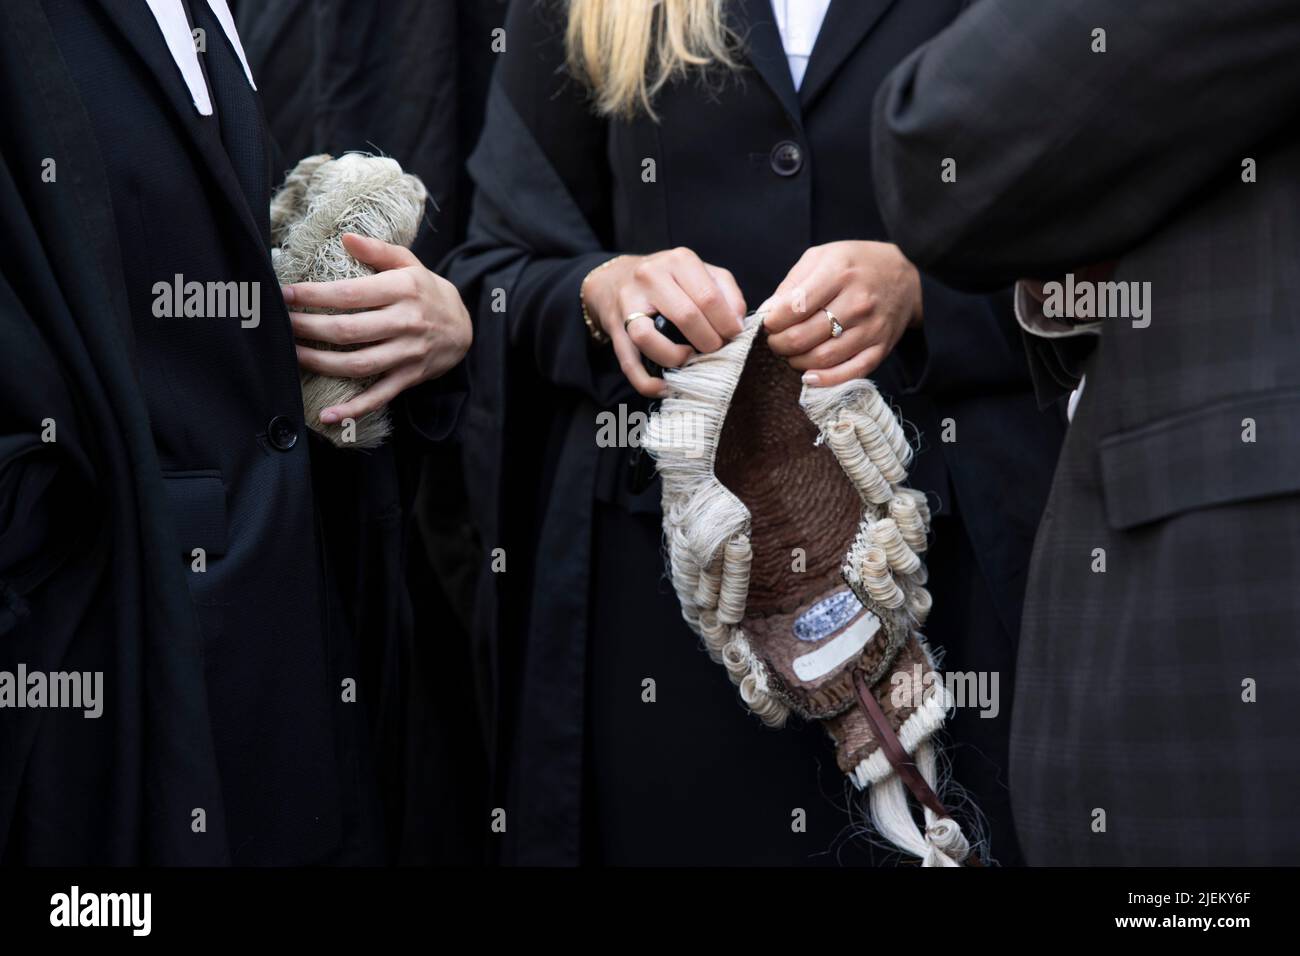 Criminal barristers are seen holding their wigs during the strike outside Old Bailey. Criminal barristers walkout from courts in strike around the UK over dispute in pay. The Criminal Bar Association (CBA) said incomes for junior criminal barristers have fallen 30% over the last 20 years and standing at average income after expenses of £12200 in the first 3 years of practice. They demand a 25% uplift in legal aid fee, which is more than the 15% minimum recommended by the Criminal Legal Aid Review published in last December. Stock Photo